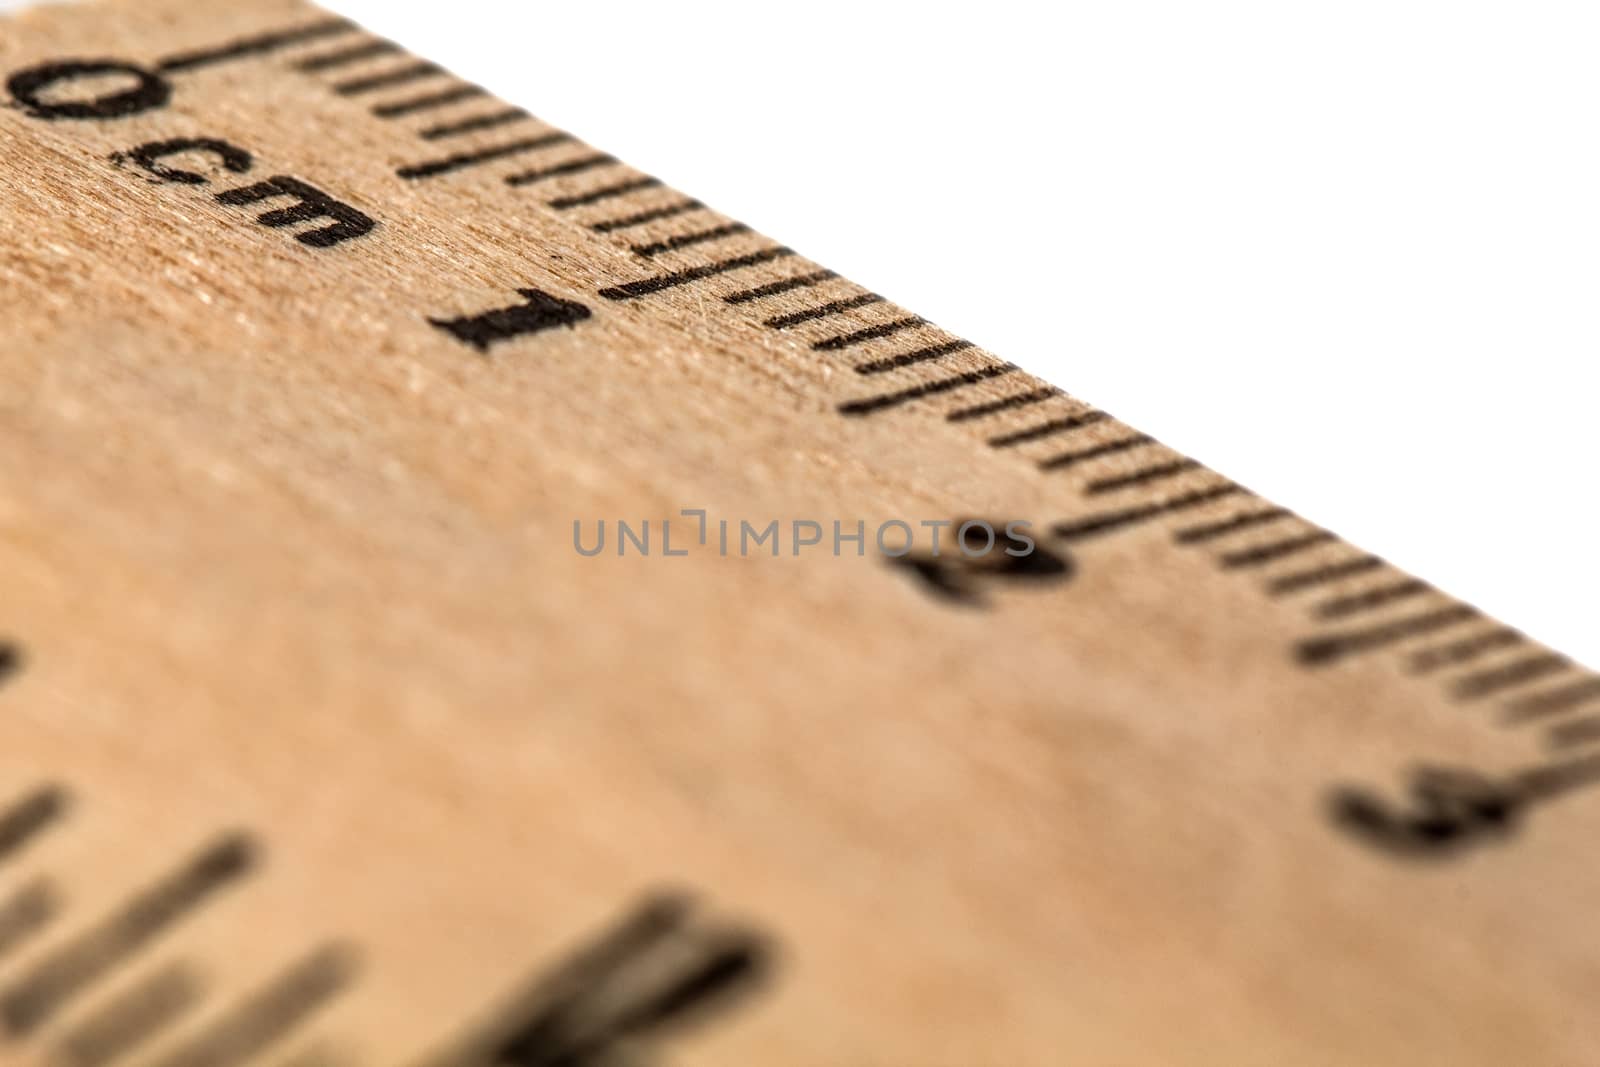 Ruler wooden, isolated on white background